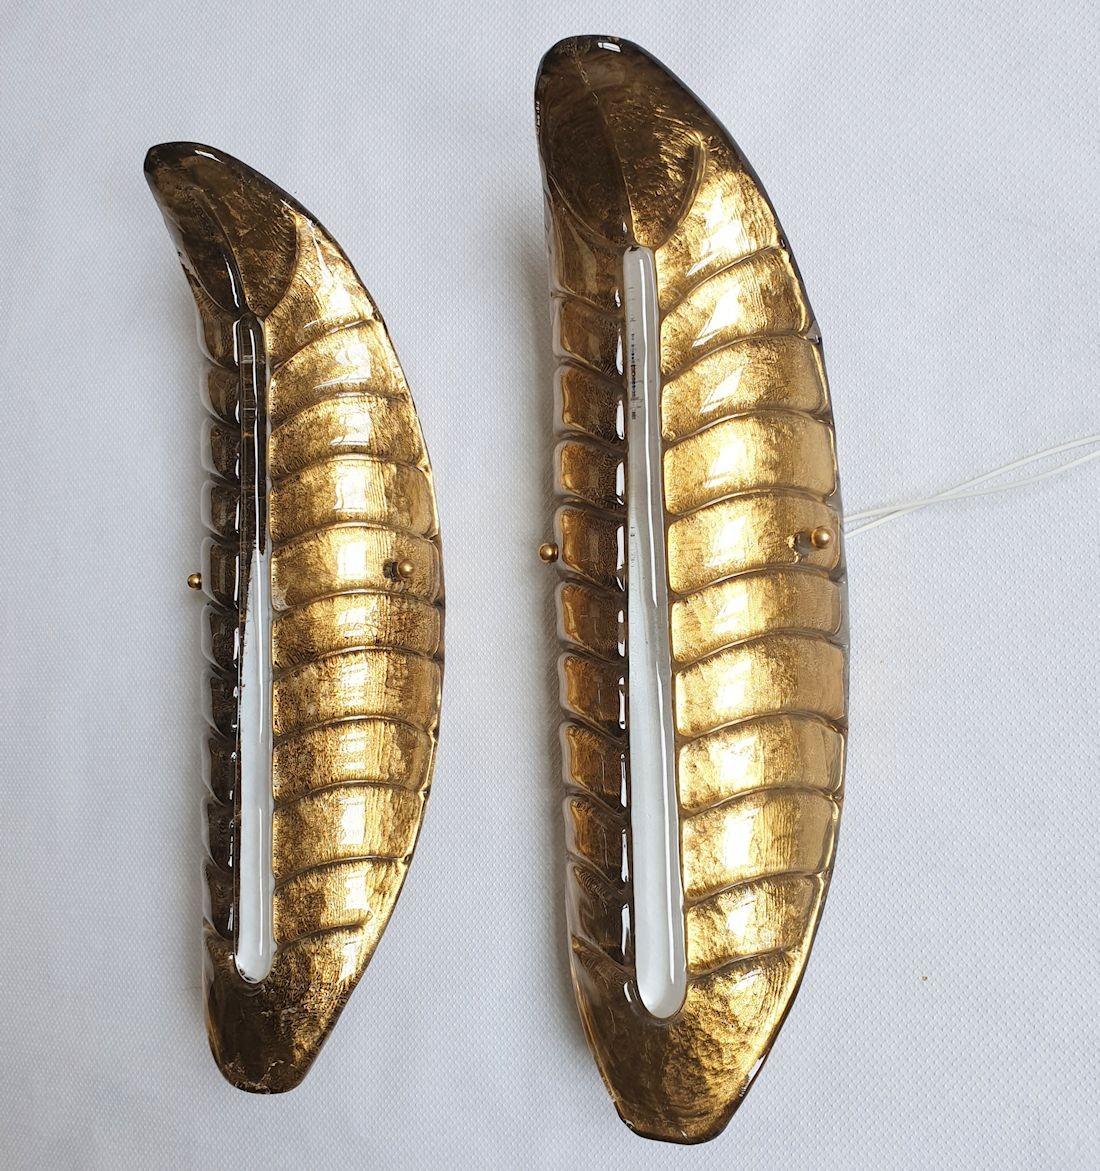 Pair of dark gold leaf Murano glass wall sconces, attributed to Barovier & Toso, Italy 1980s.
The mid century modern sconces are made of a single stylized leaf shaped Handmade Murano glass piece.
The glass is in a translucent dark gold color, with